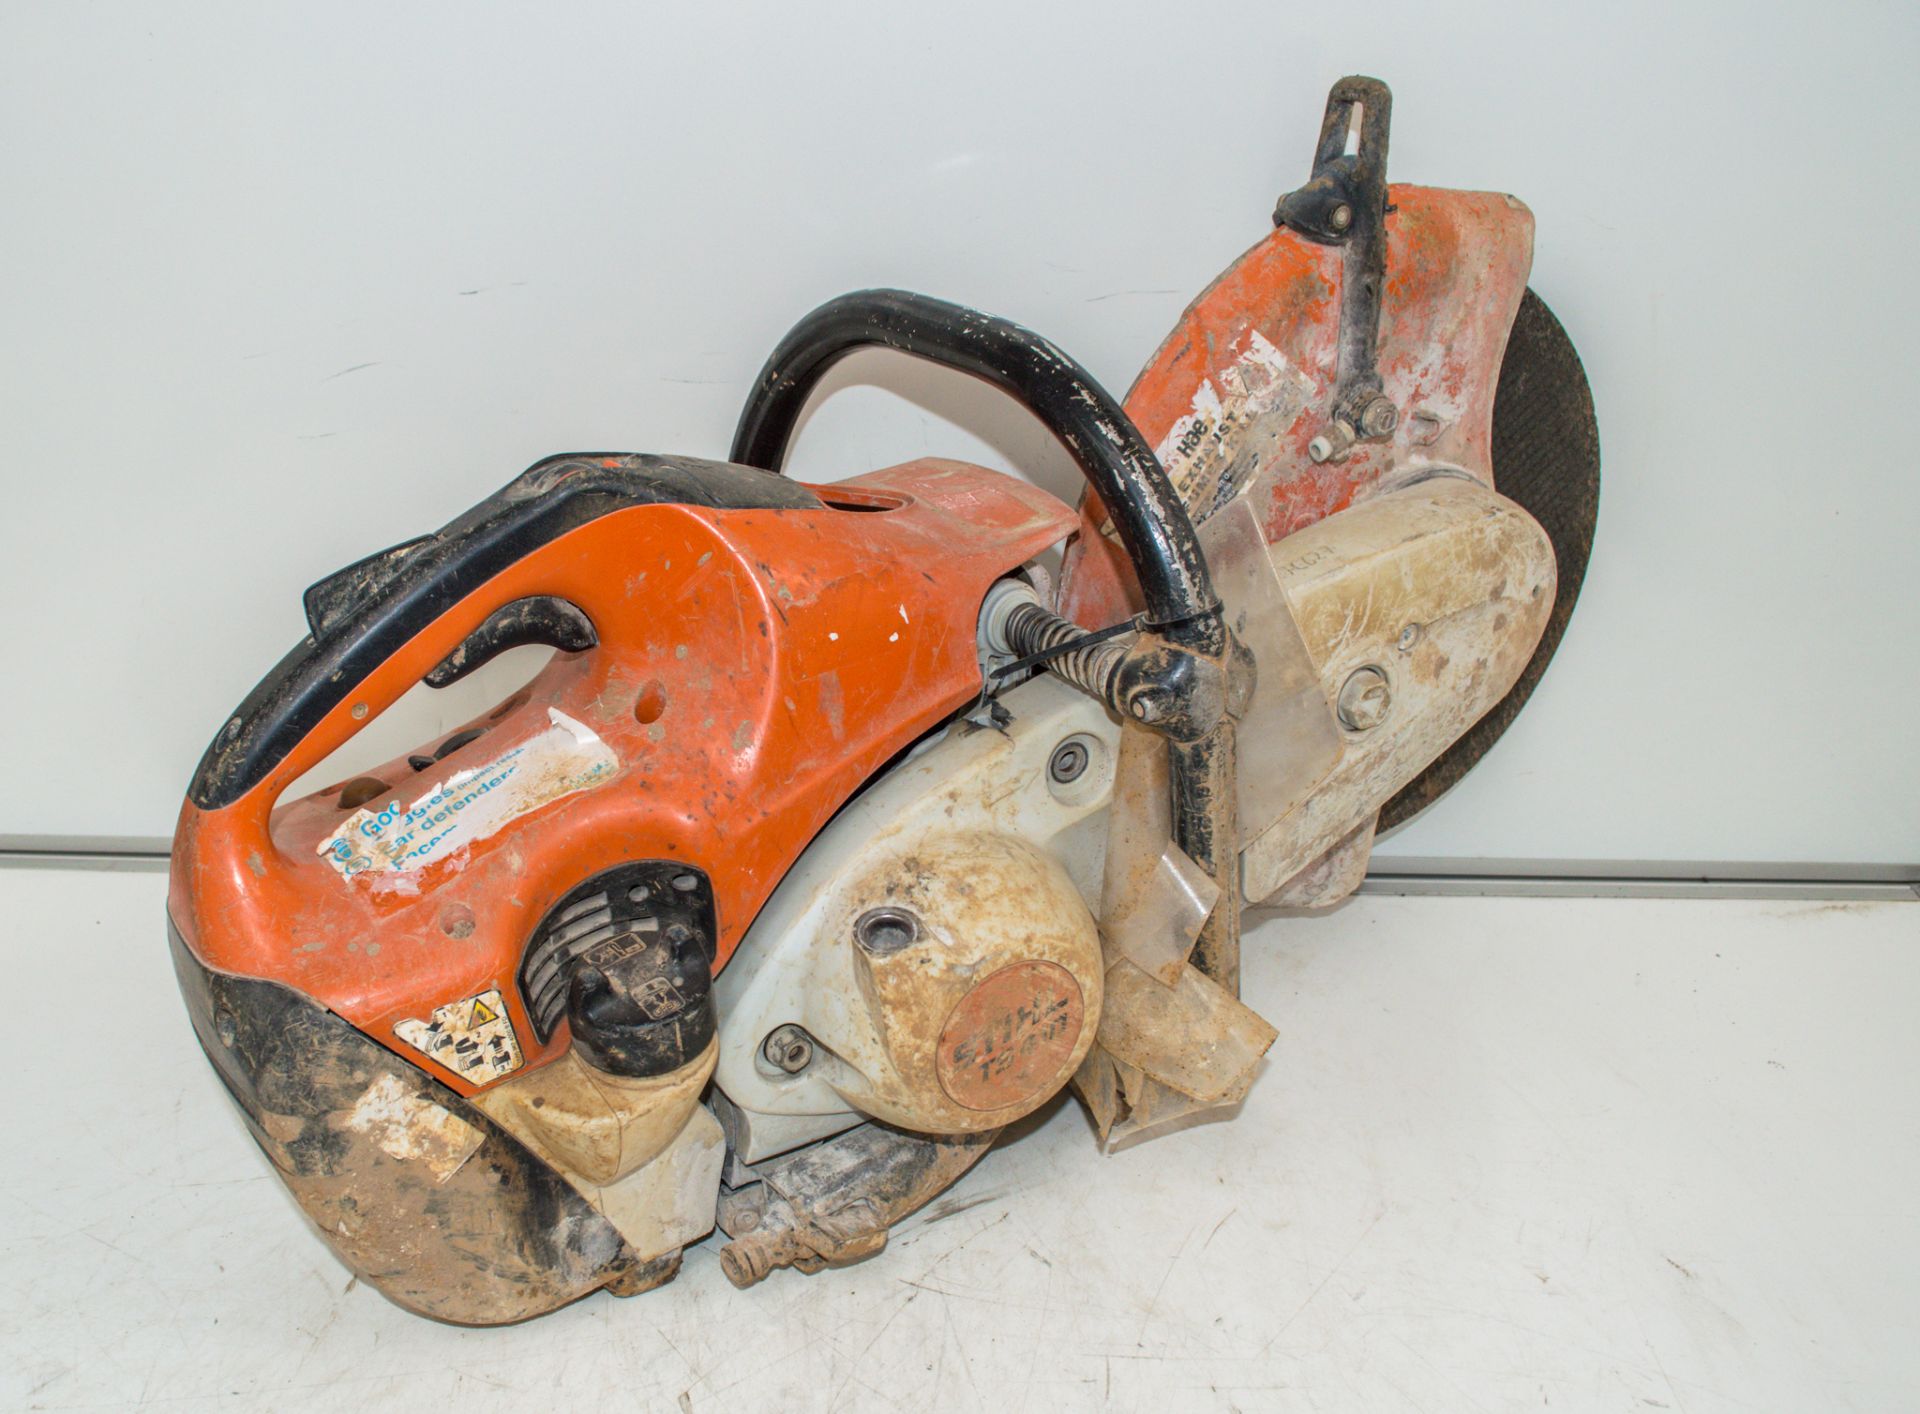 Stihl TS410 petrol driven cut off saw ** No pull cord and casing loose ** 0227C627 - Image 2 of 2